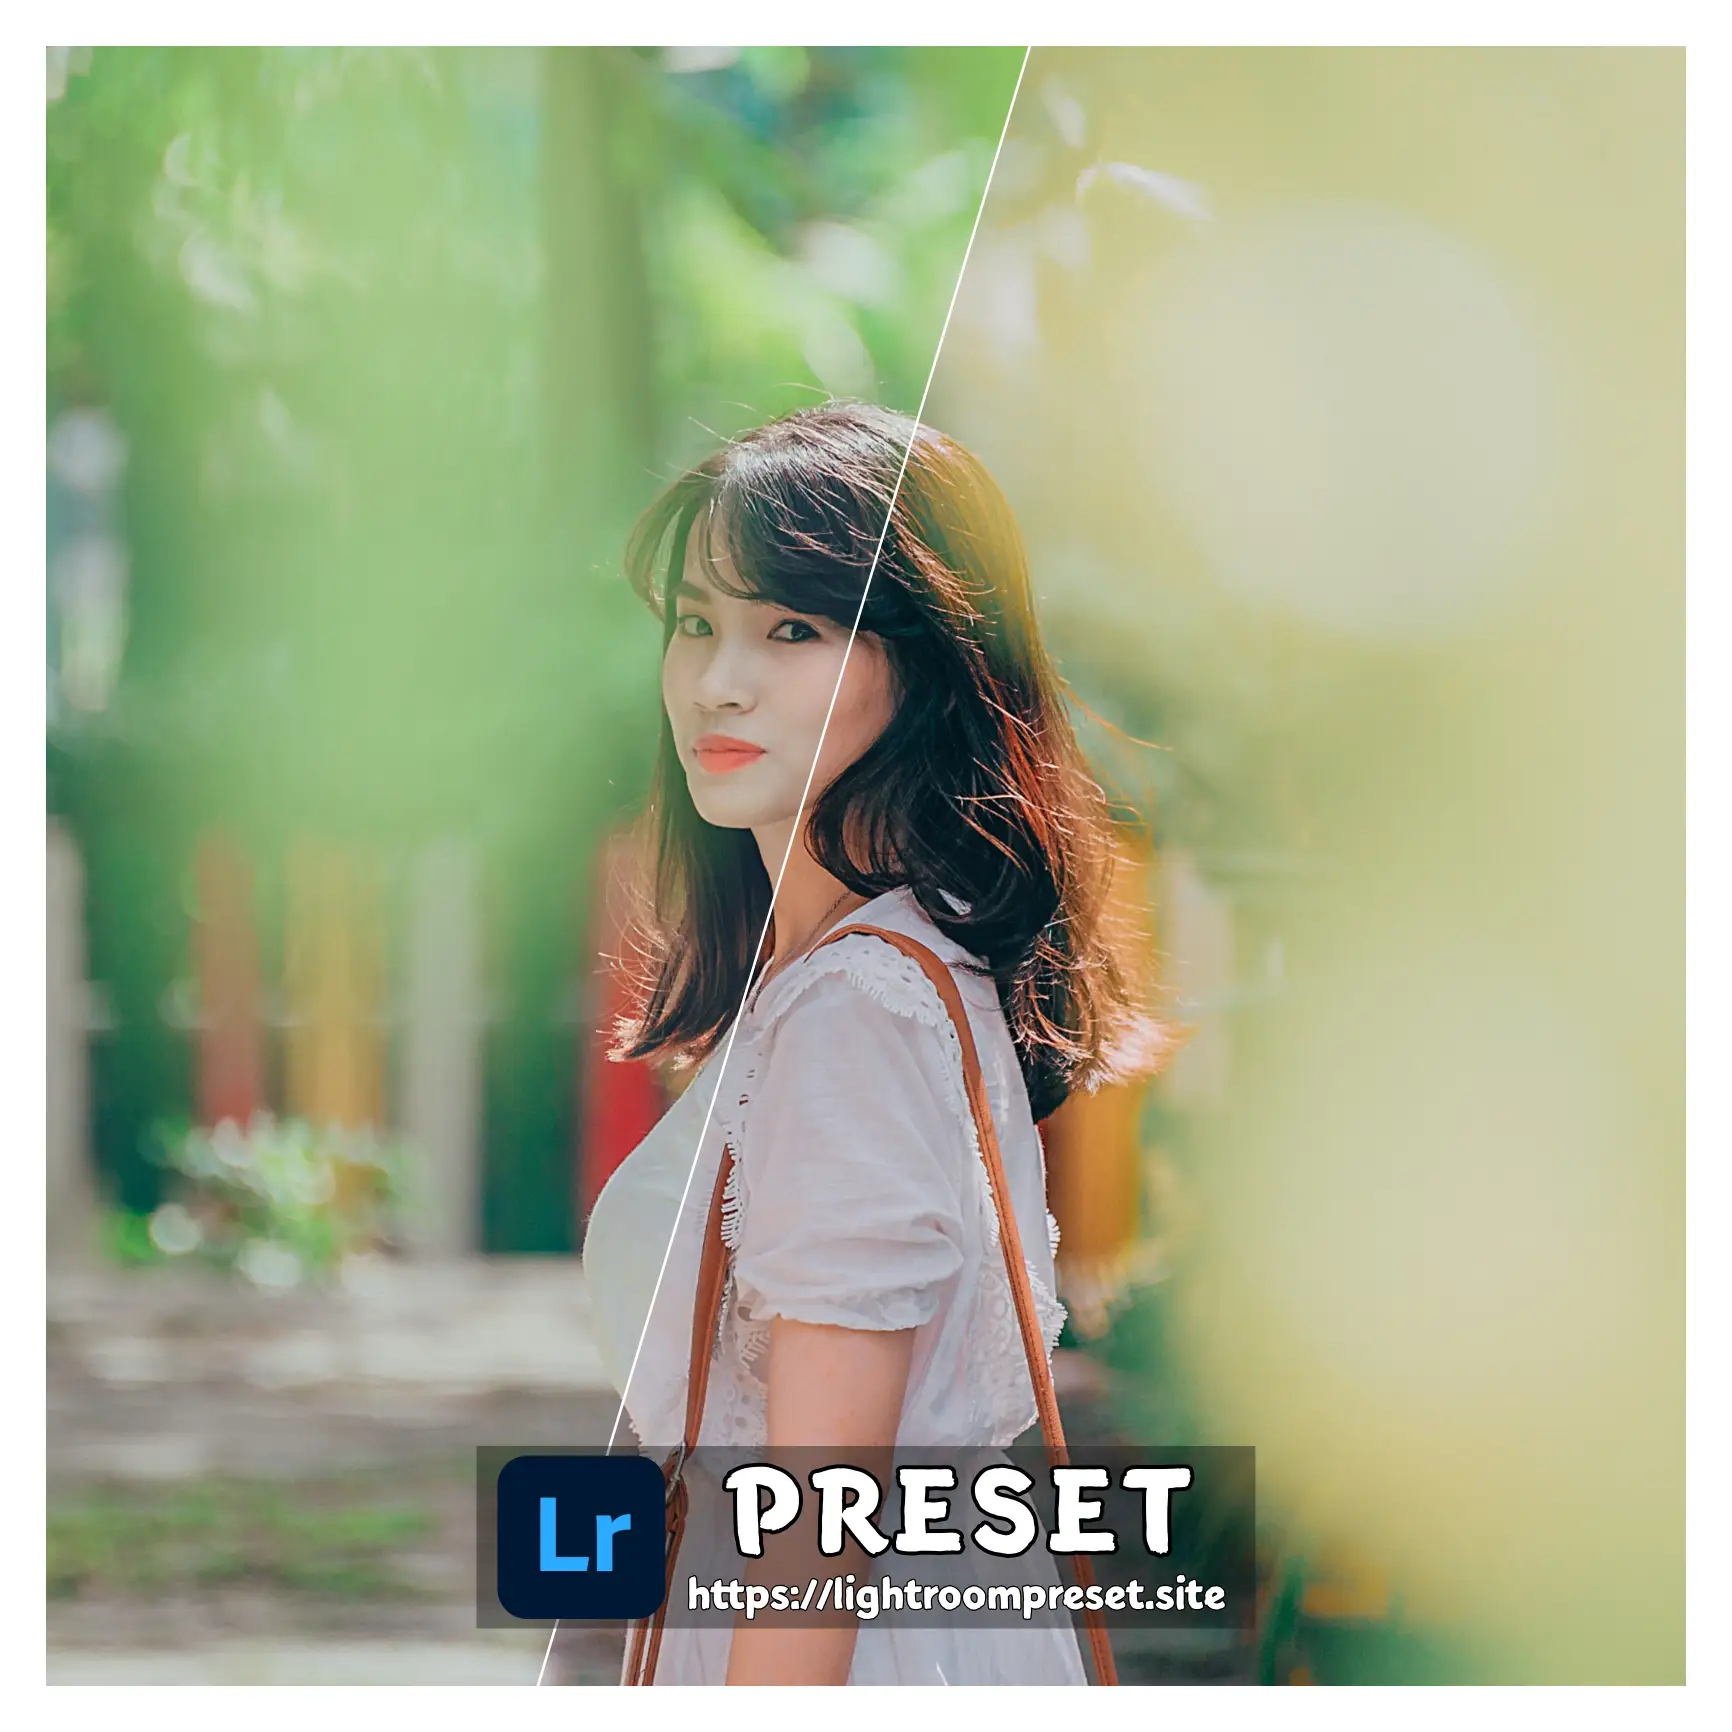 You are currently viewing Airbnb lightroom presets download free in dng